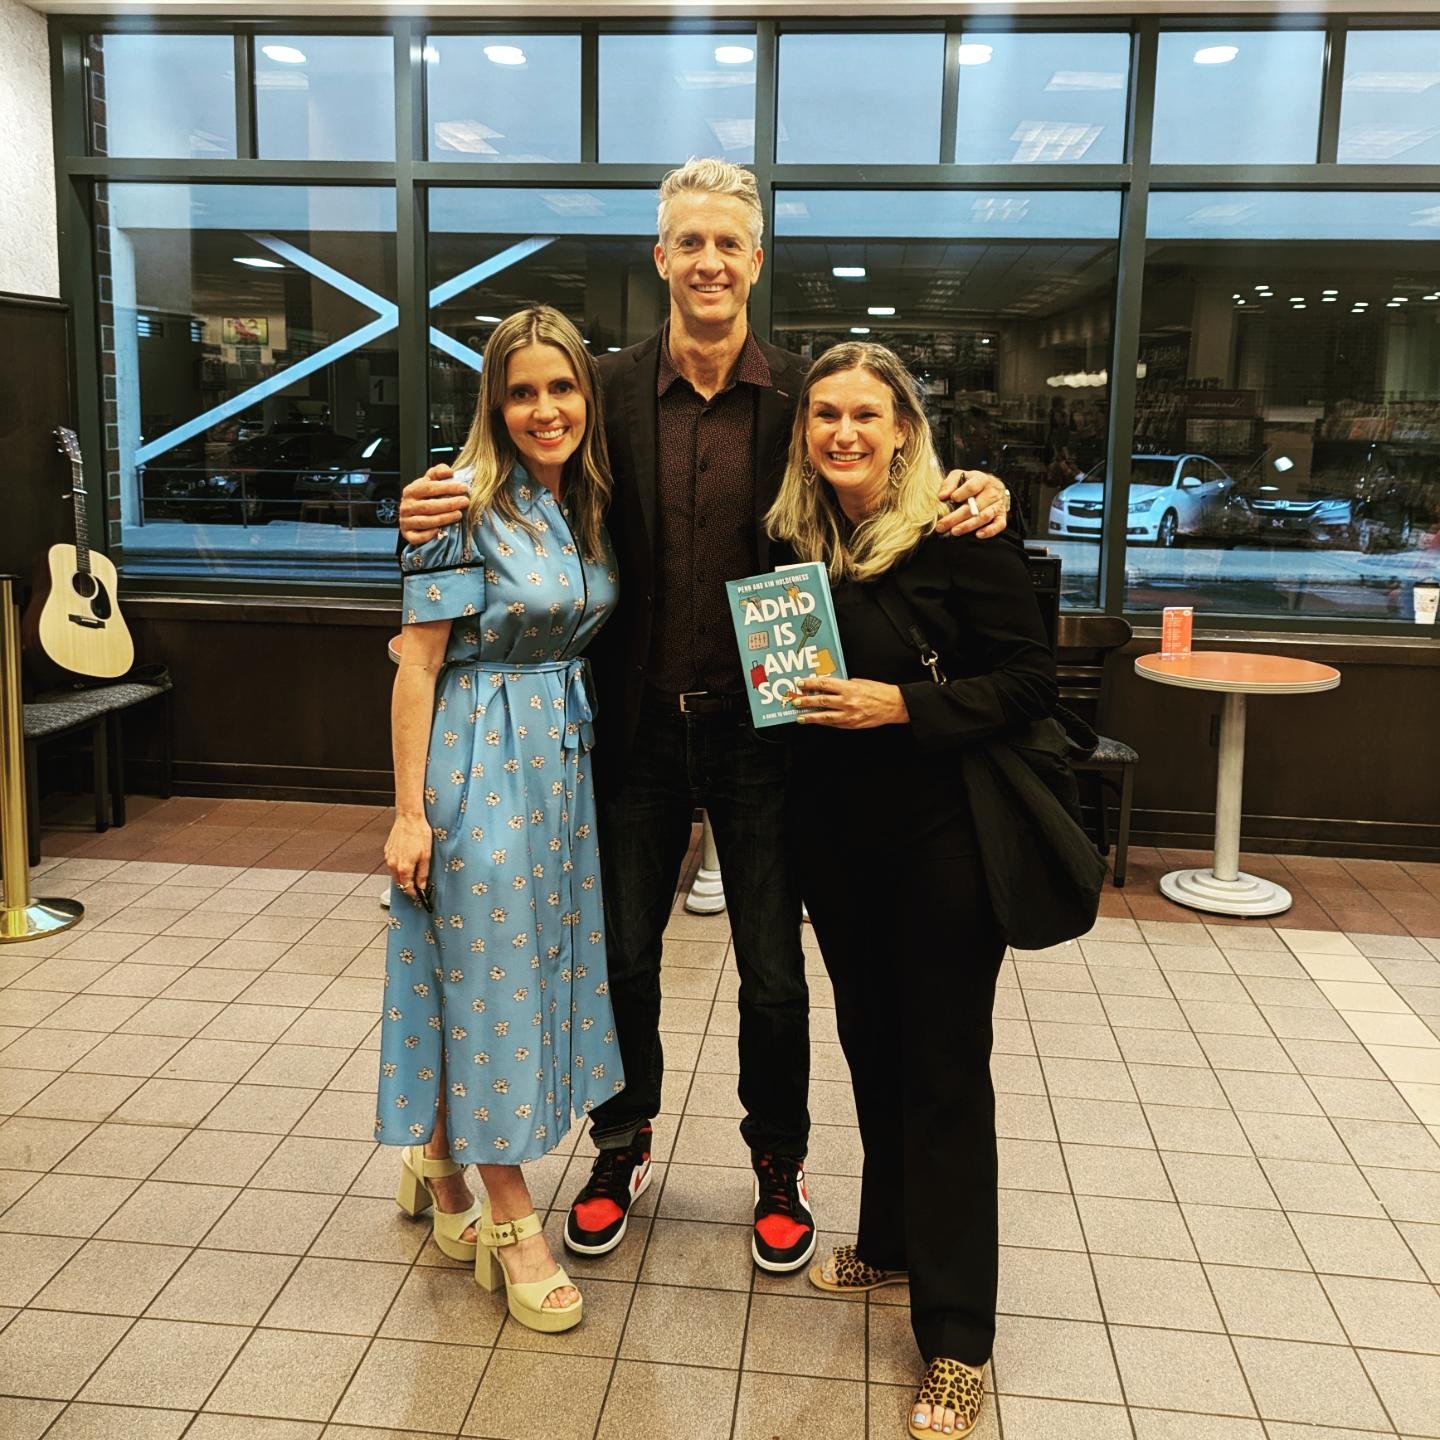 What an amazing night celebrating the launch of &quot;ADHD is Awesome&quot; by @doublechinpennstagram and Kim Holderness! As a Master IEP Coach&copy; specializing in neurodivergent brains like ADHD, autism, and dyslexia, it was so energizing to be su